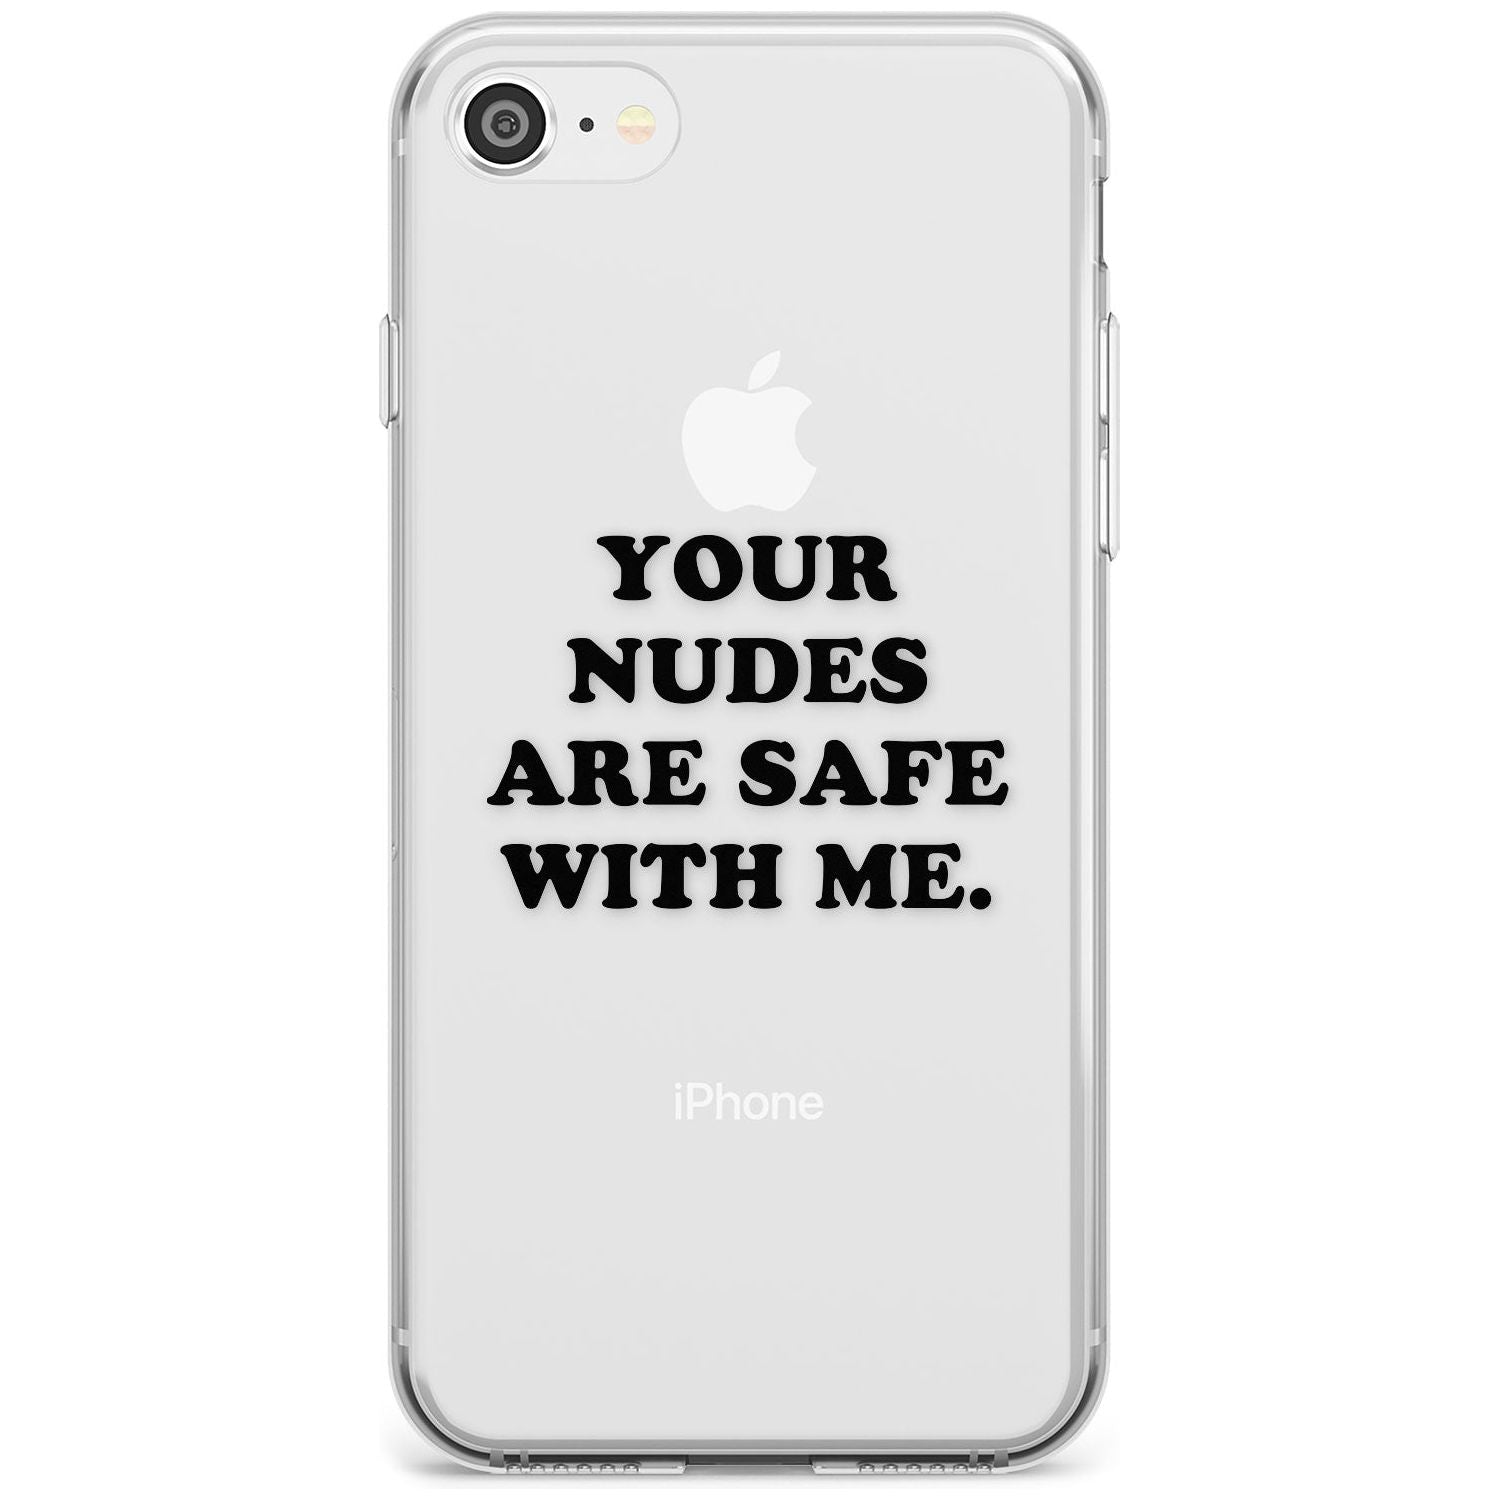 Your nudes are safe with me... BLACK Slim TPU Phone Case for iPhone SE 8 7 Plus